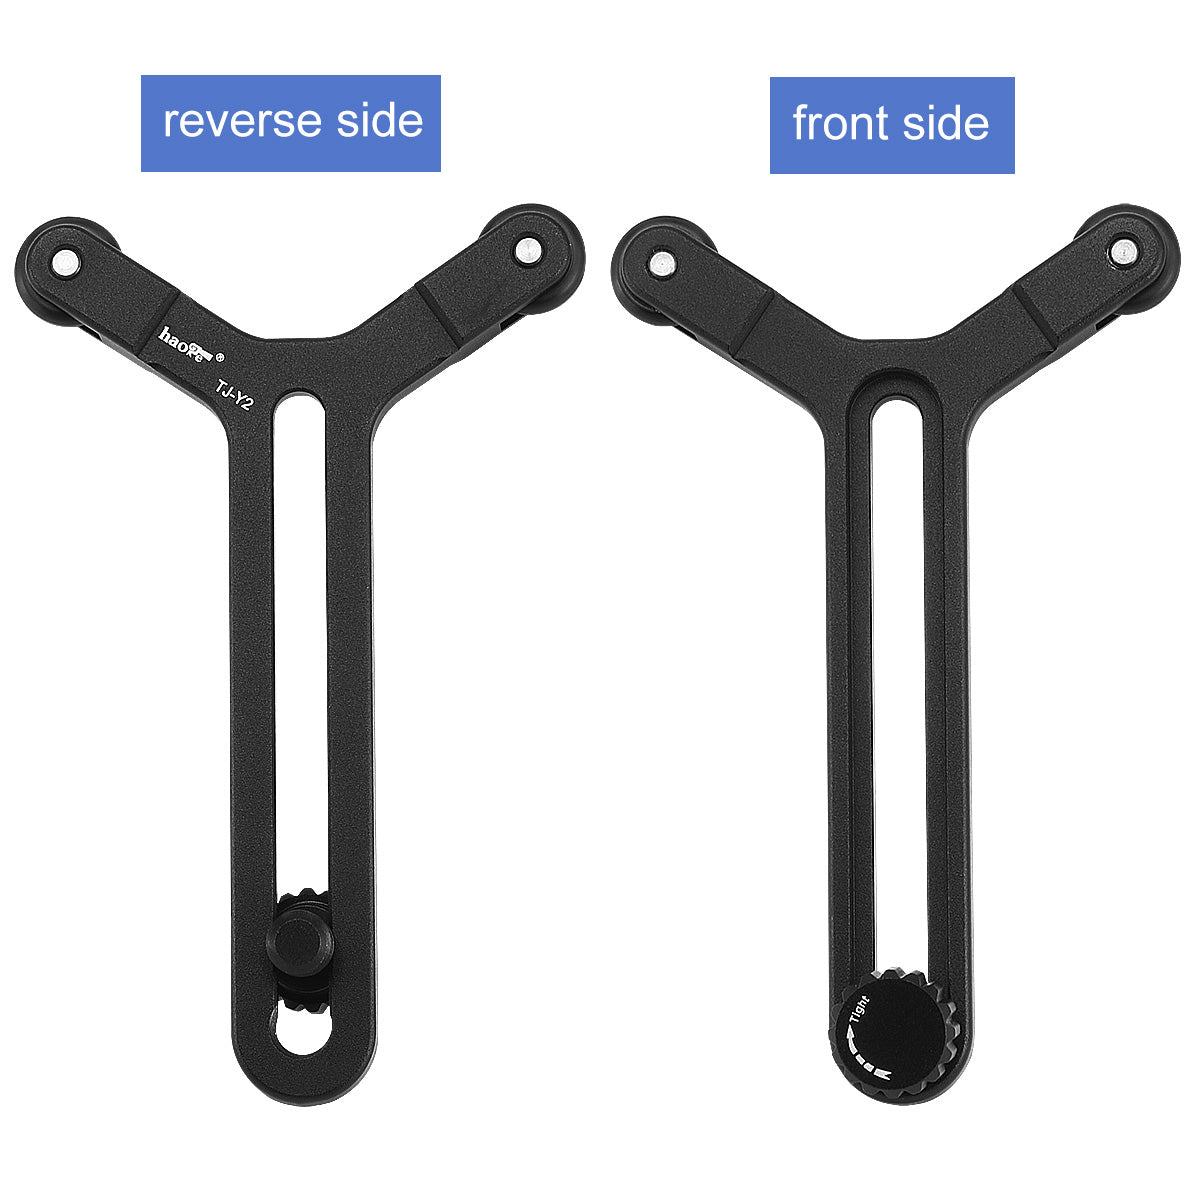 Haoge TJ-Y2 Y Bracket with Double Wheels for DIY DJI Ronin-S Ronin-SC Ronin SC S Lens Support System fit Selected Haoge Plates